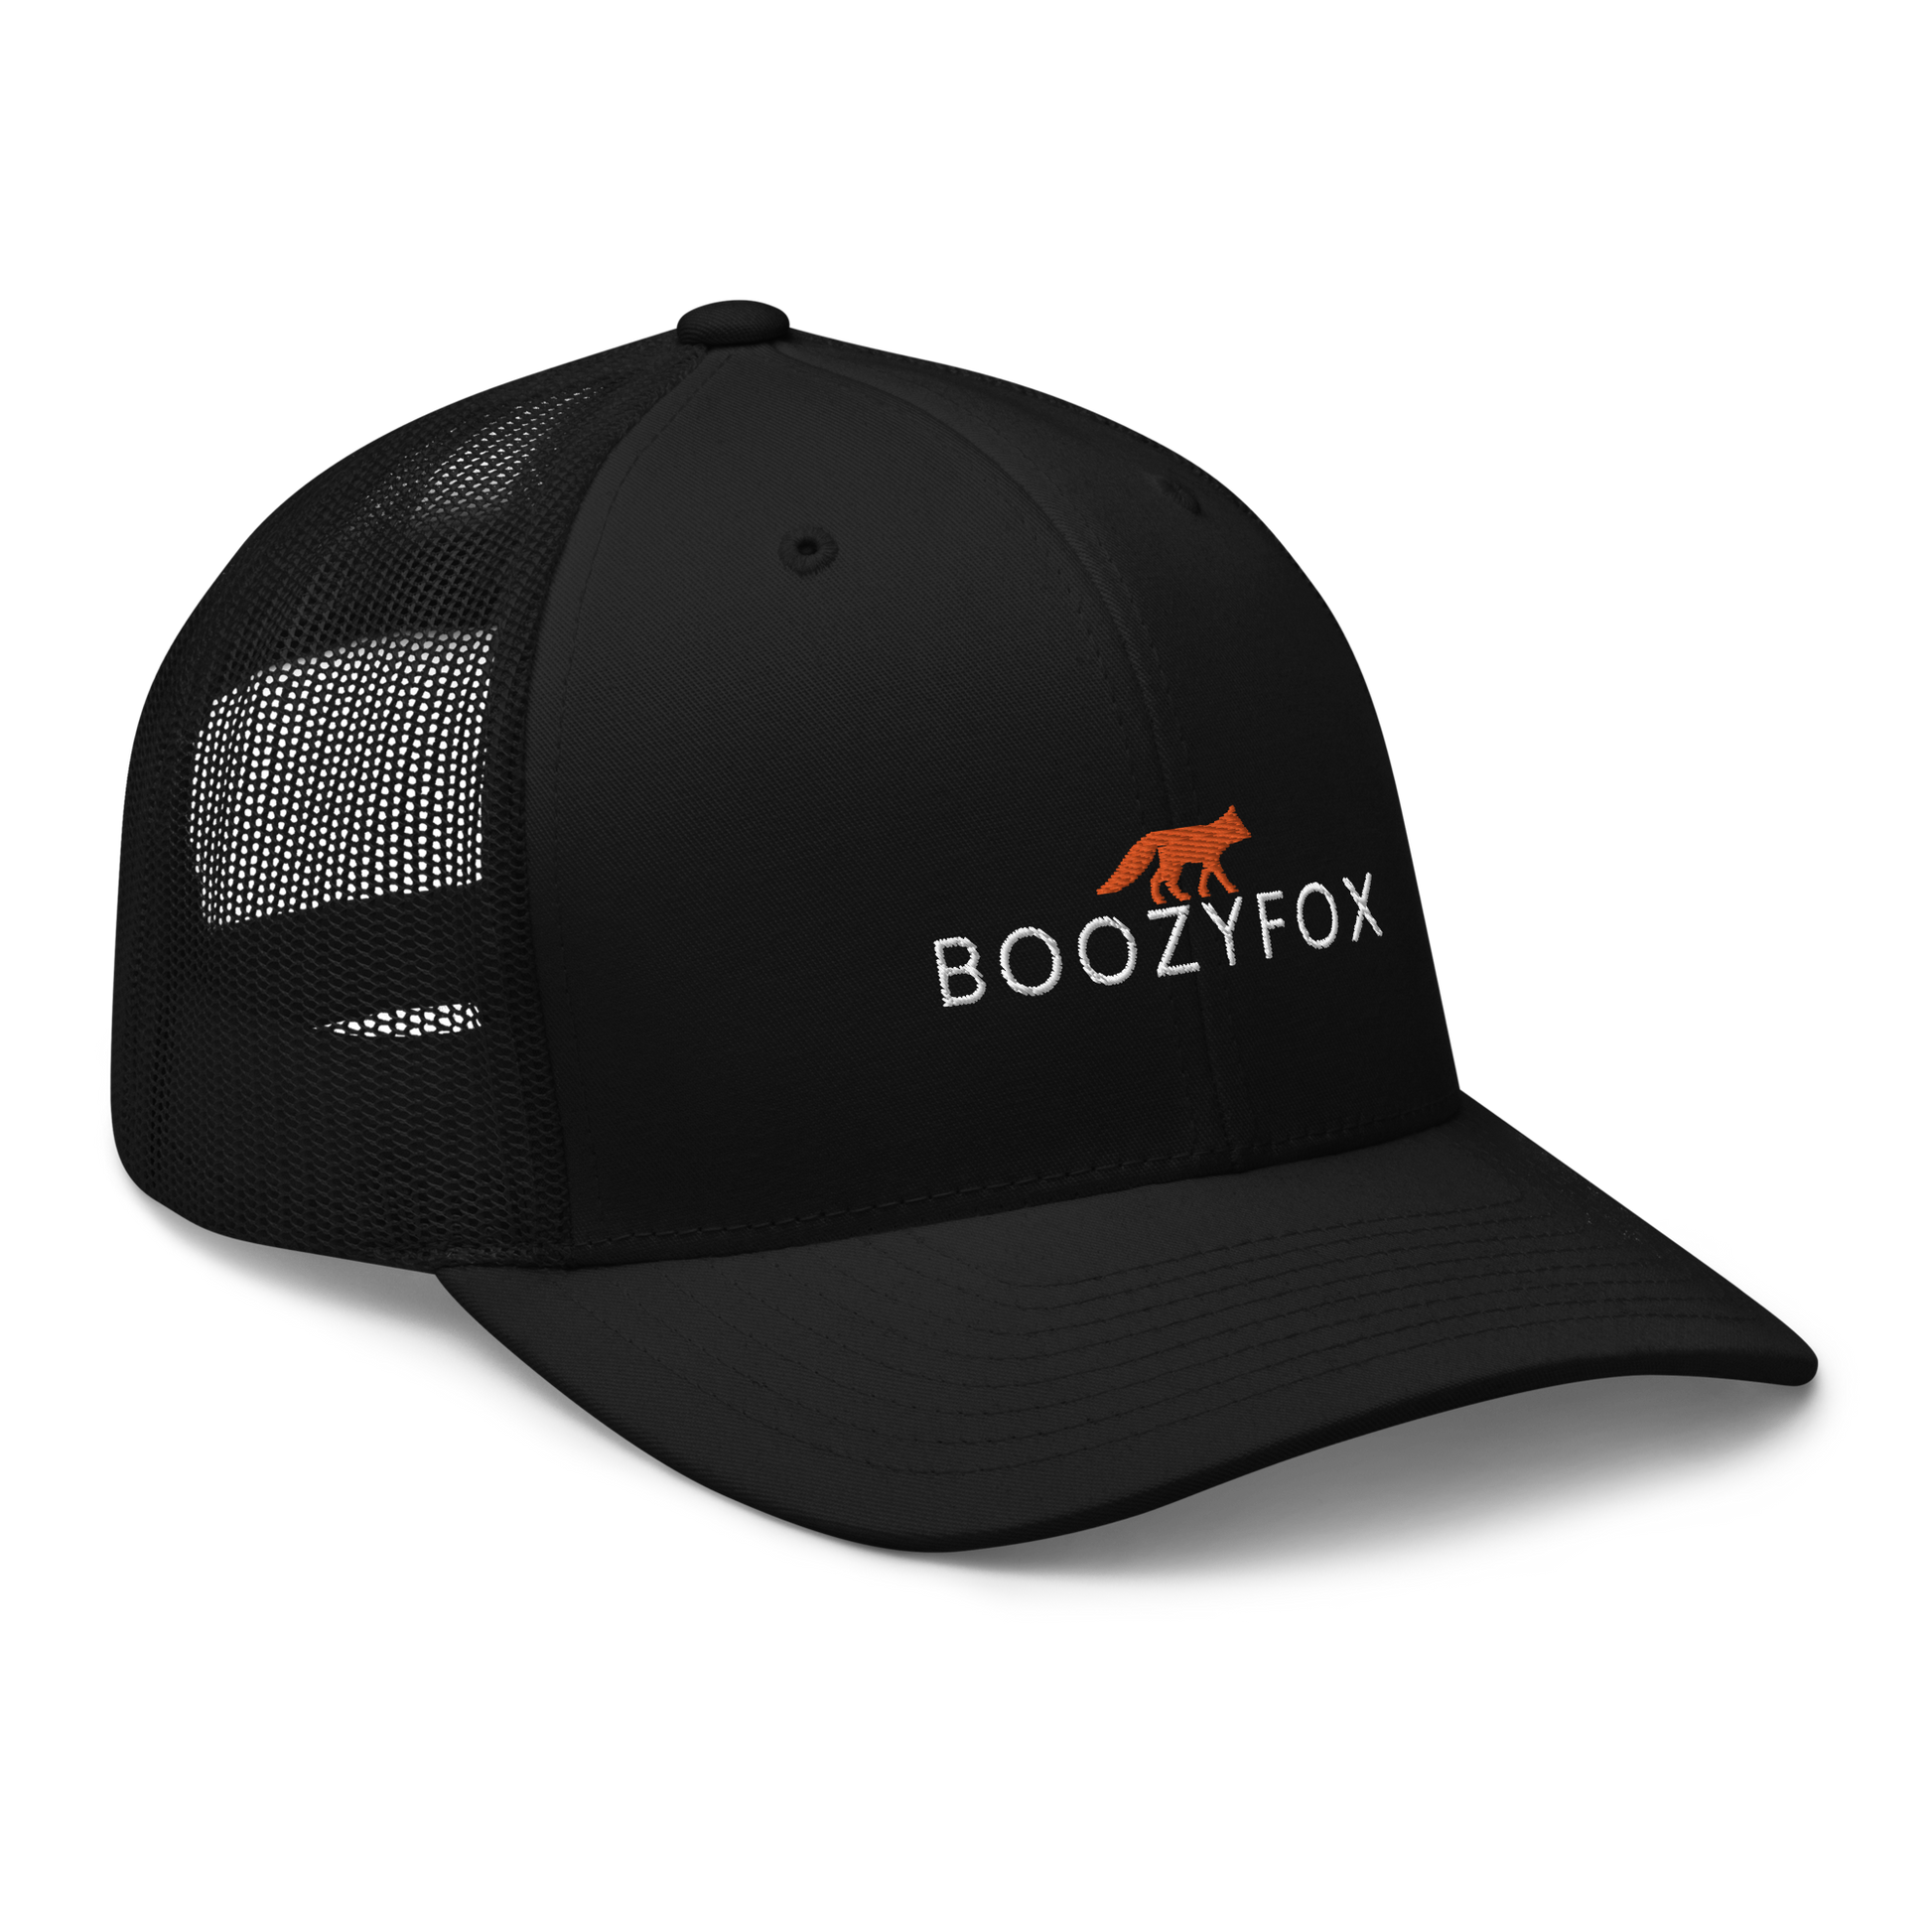 Black Retro Trucker Hat featuring an embroidered Boozy Fox logo on front 